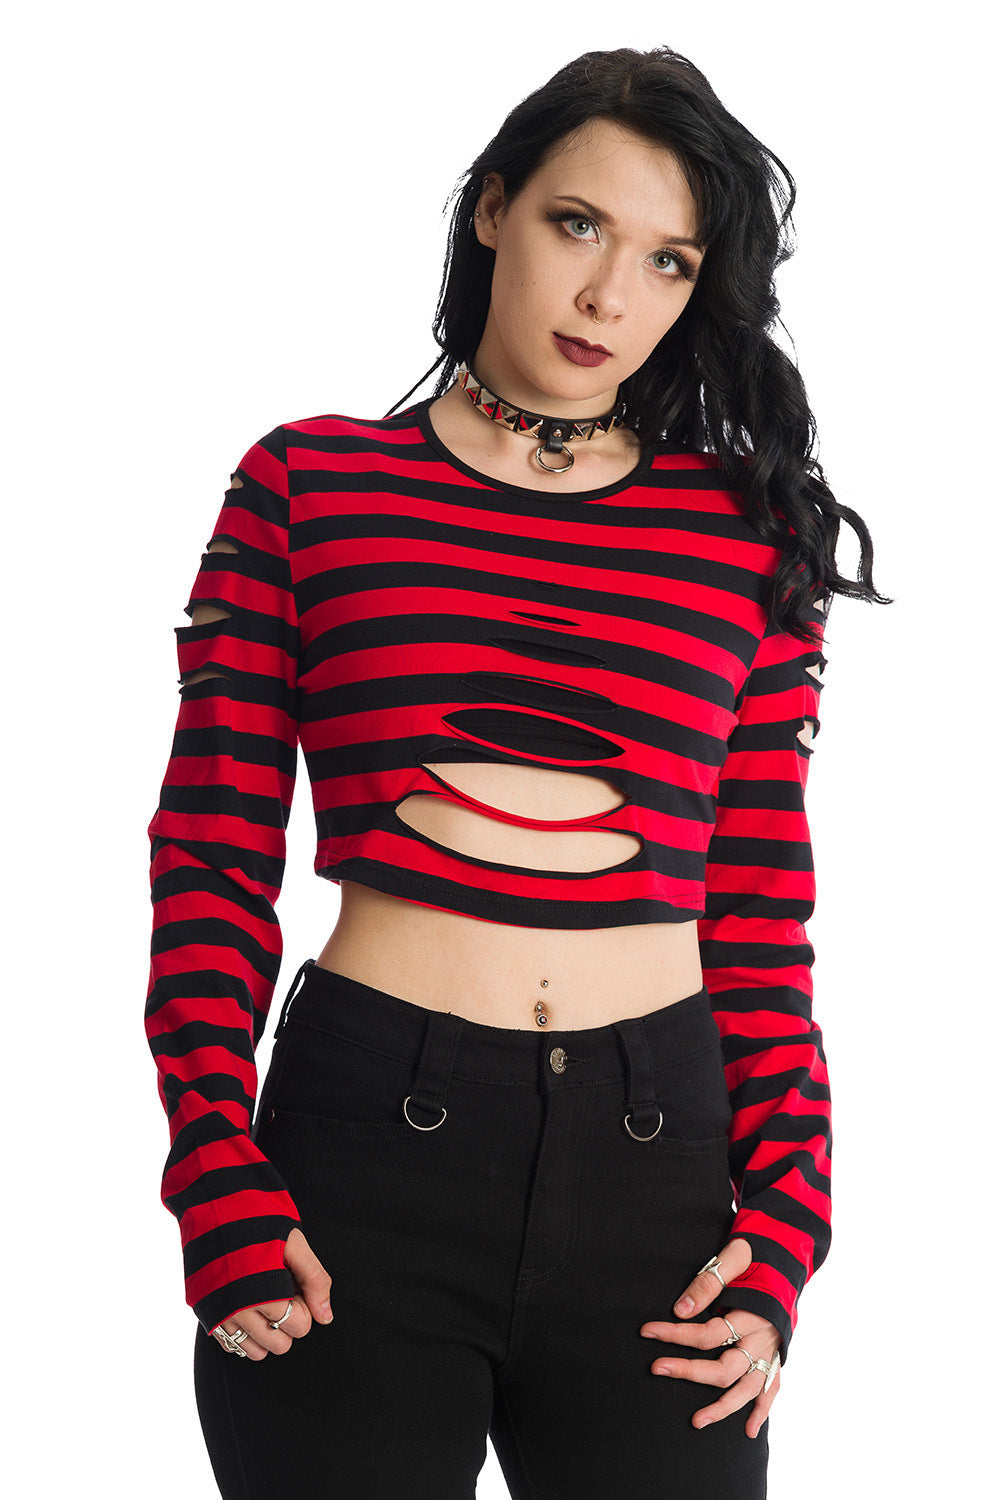 Chantrea Red and Stripe Rip Long Sleeve Crop Top Alternative with Thumb holes by Banned Alternative – Banned Alternative